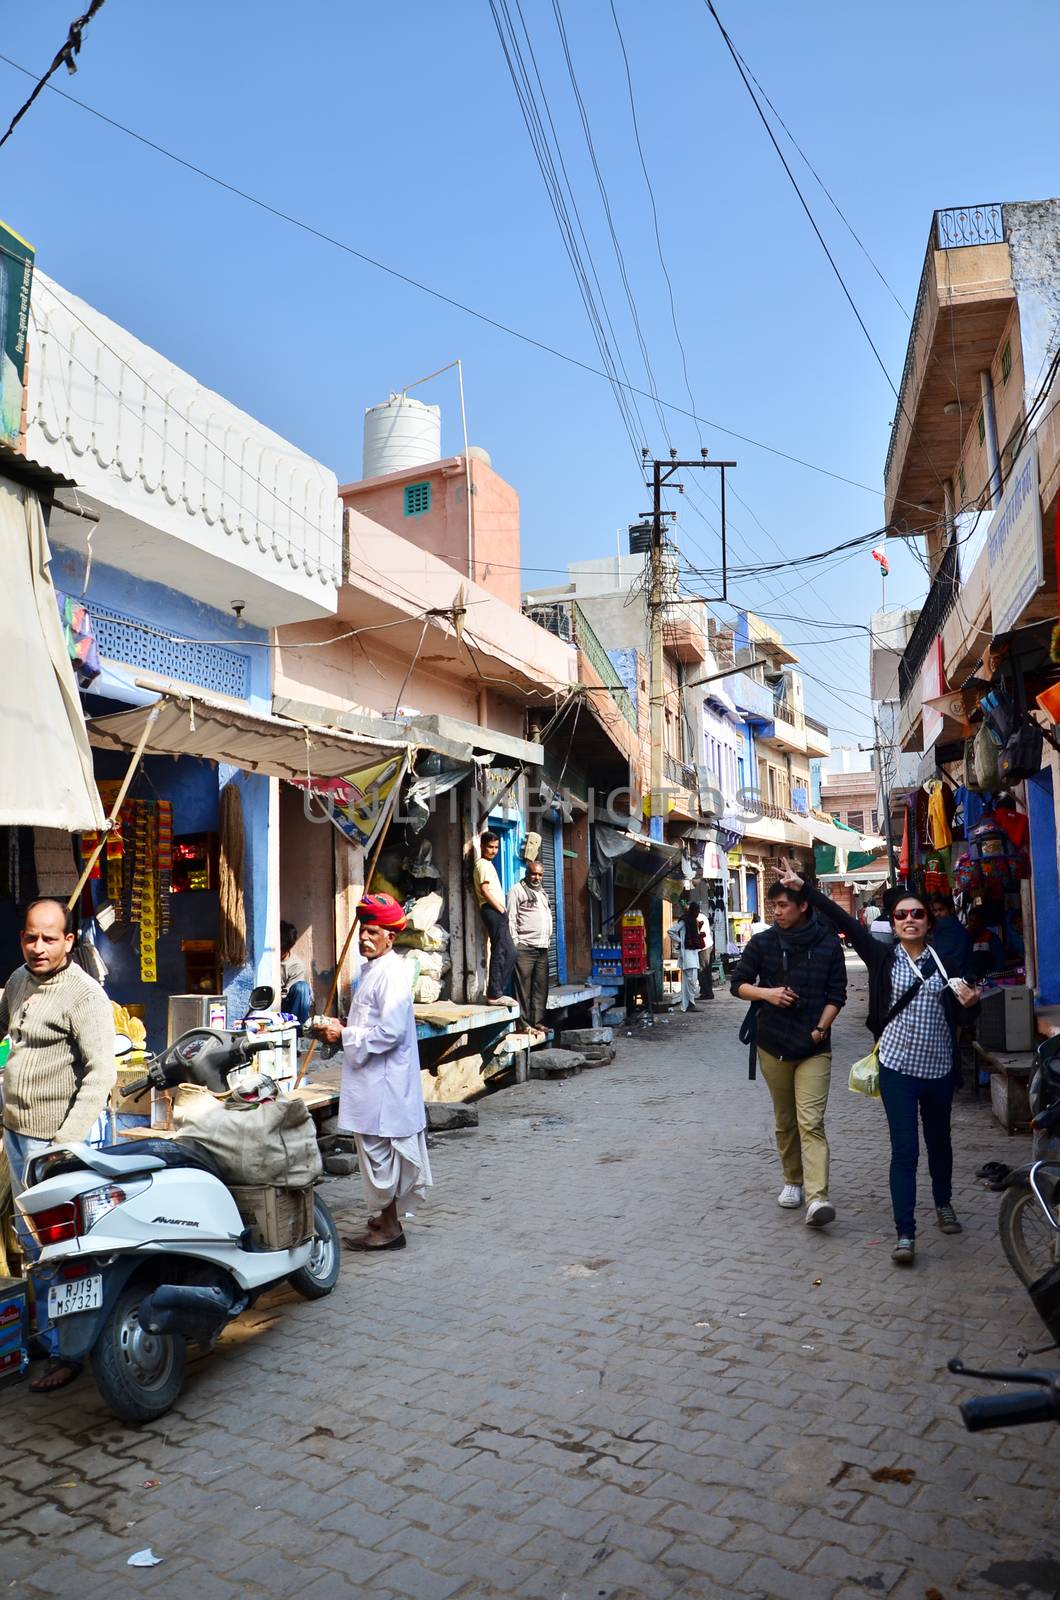 Jodhpur, India - January 1, 2015: Tourist visit traditional village in Jodhpur, India. Jodhpur is the second largest city in the Indian state of Rajasthan with over 1 million habitants.